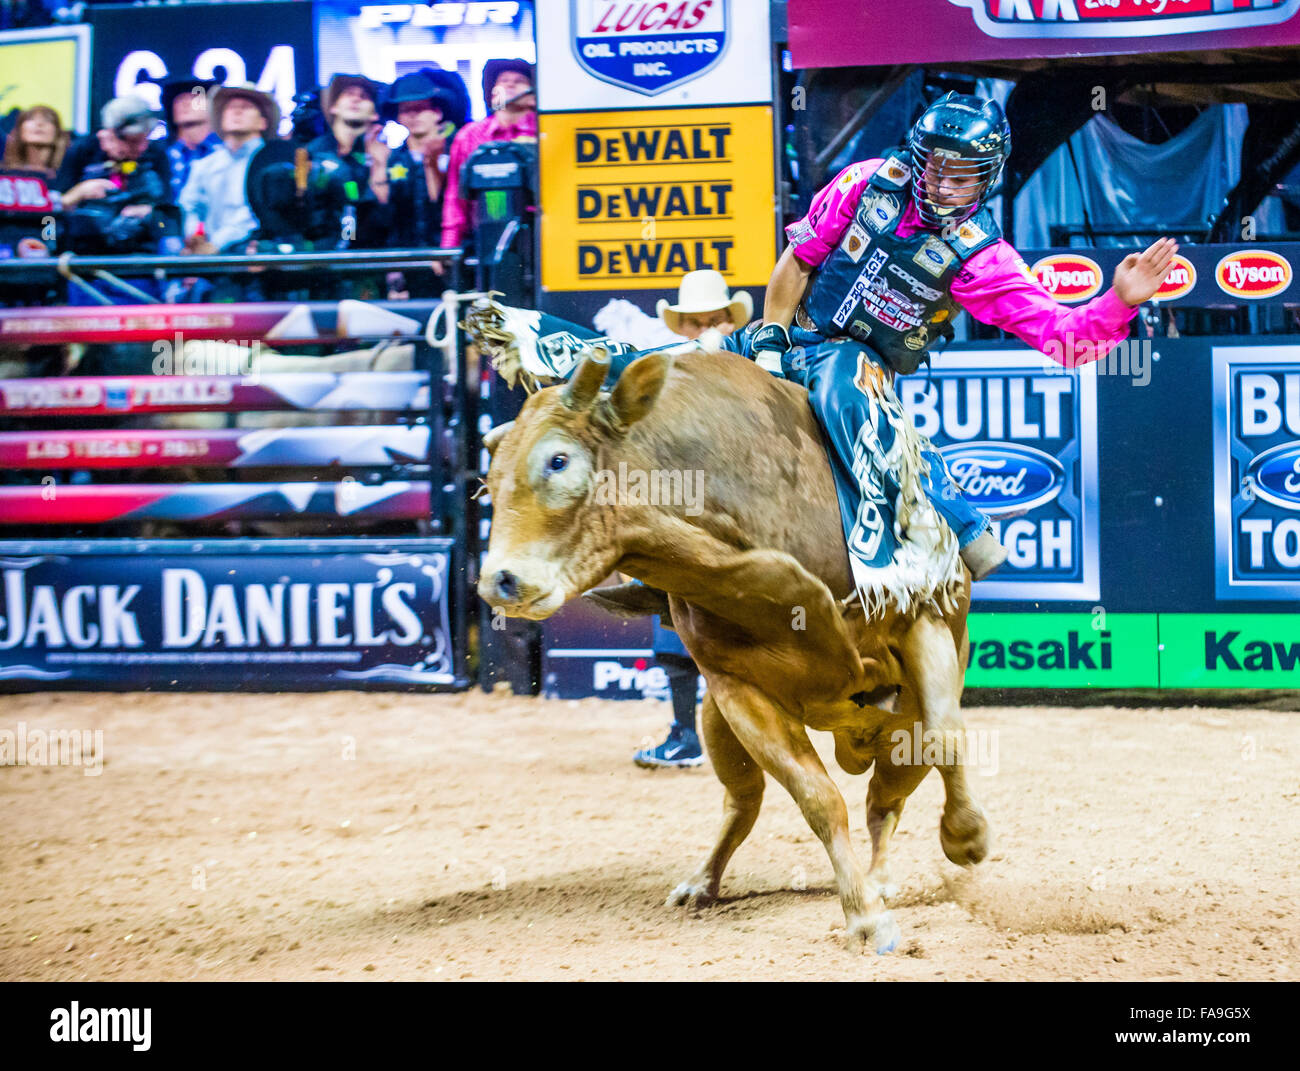 Cowboy Participating in the PBR bull riding world finals. The bull riding world championship held in Las Vegas Stock Photo